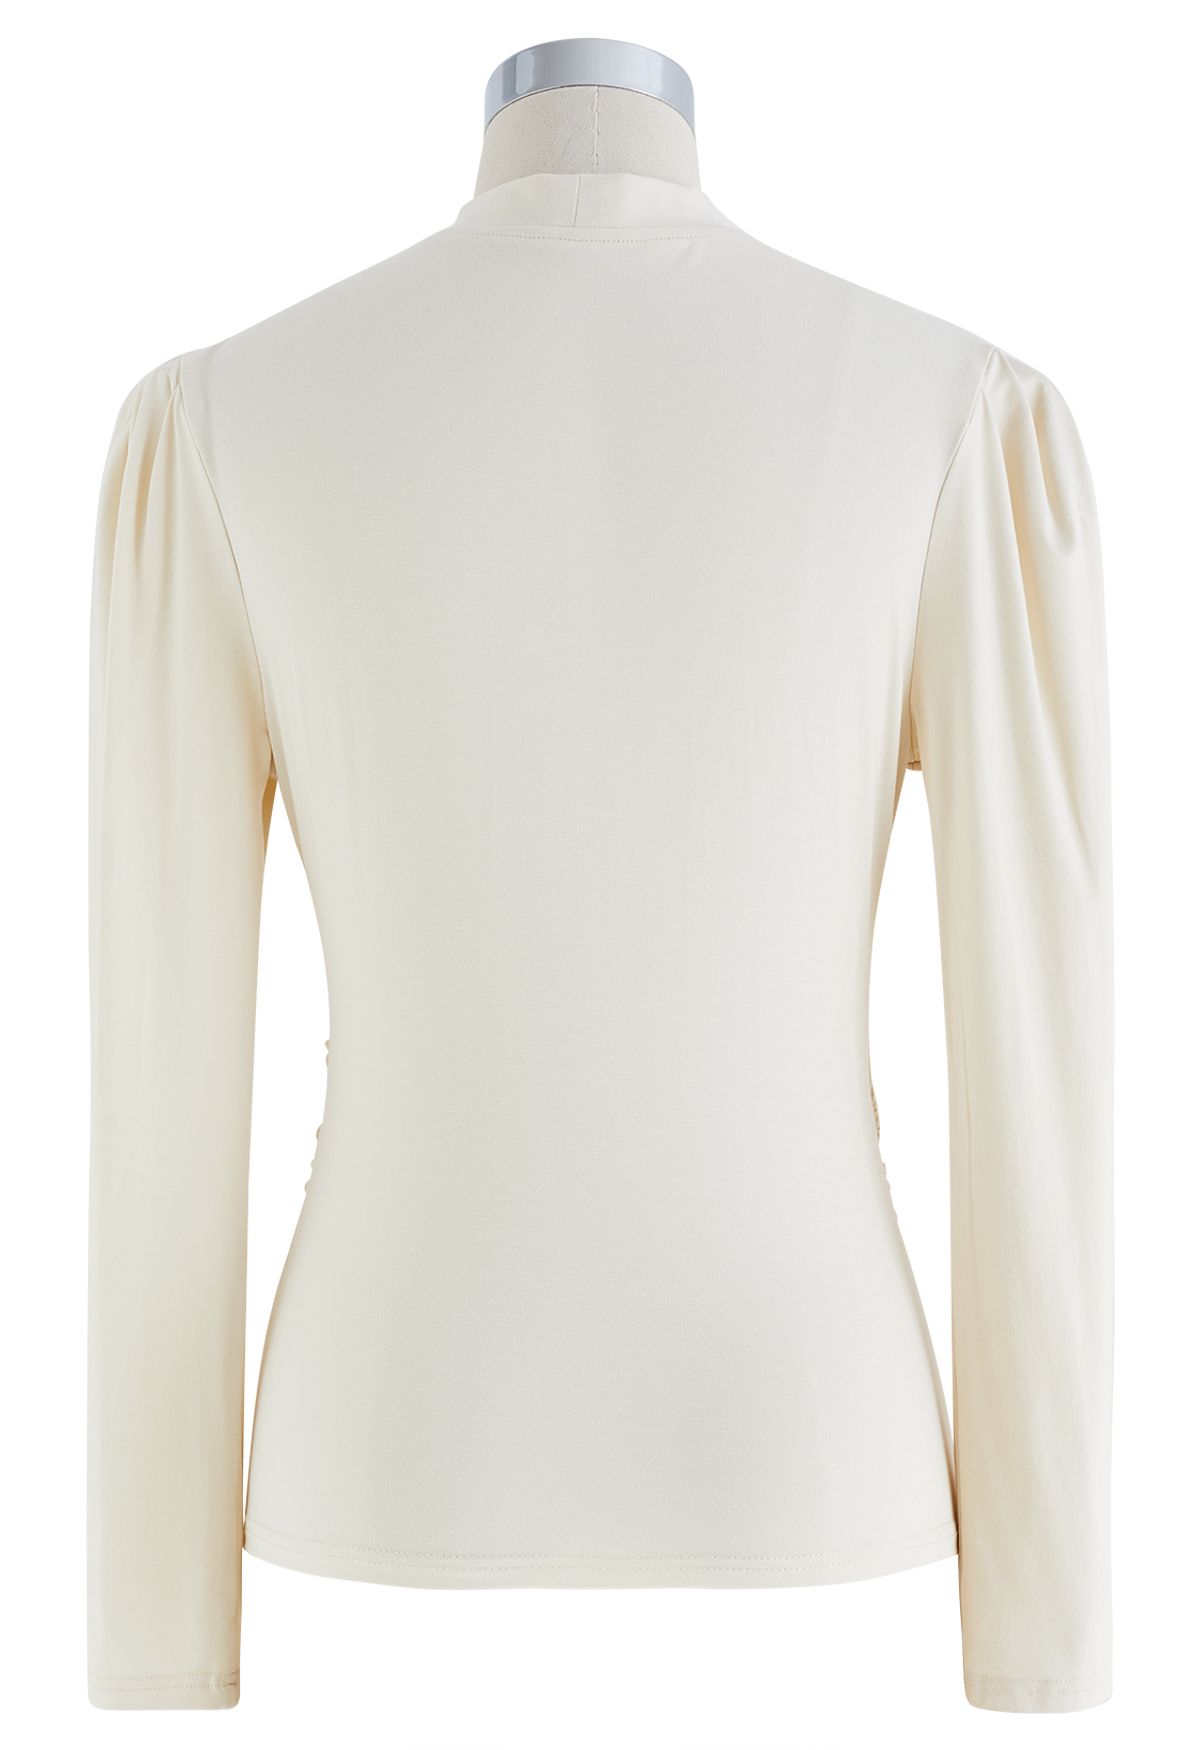 Choker Neck Ruched Front Long Sleeve Top in Cream